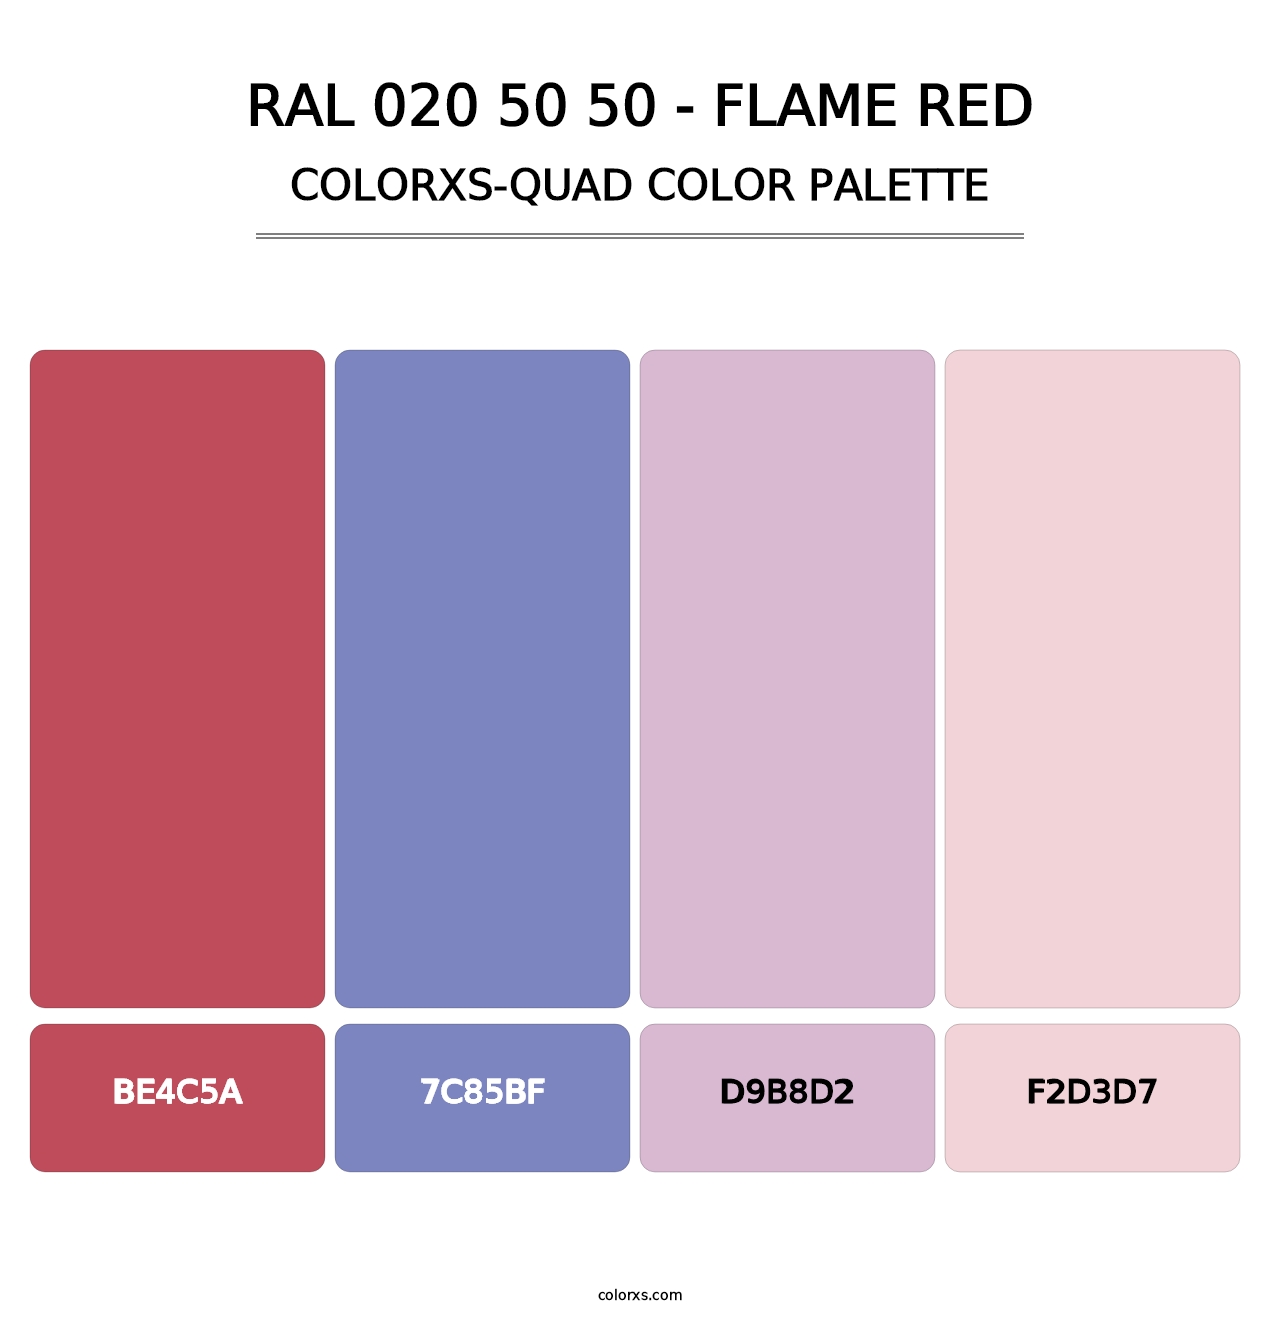 RAL 020 50 50 - Flame Red - Colorxs Quad Palette